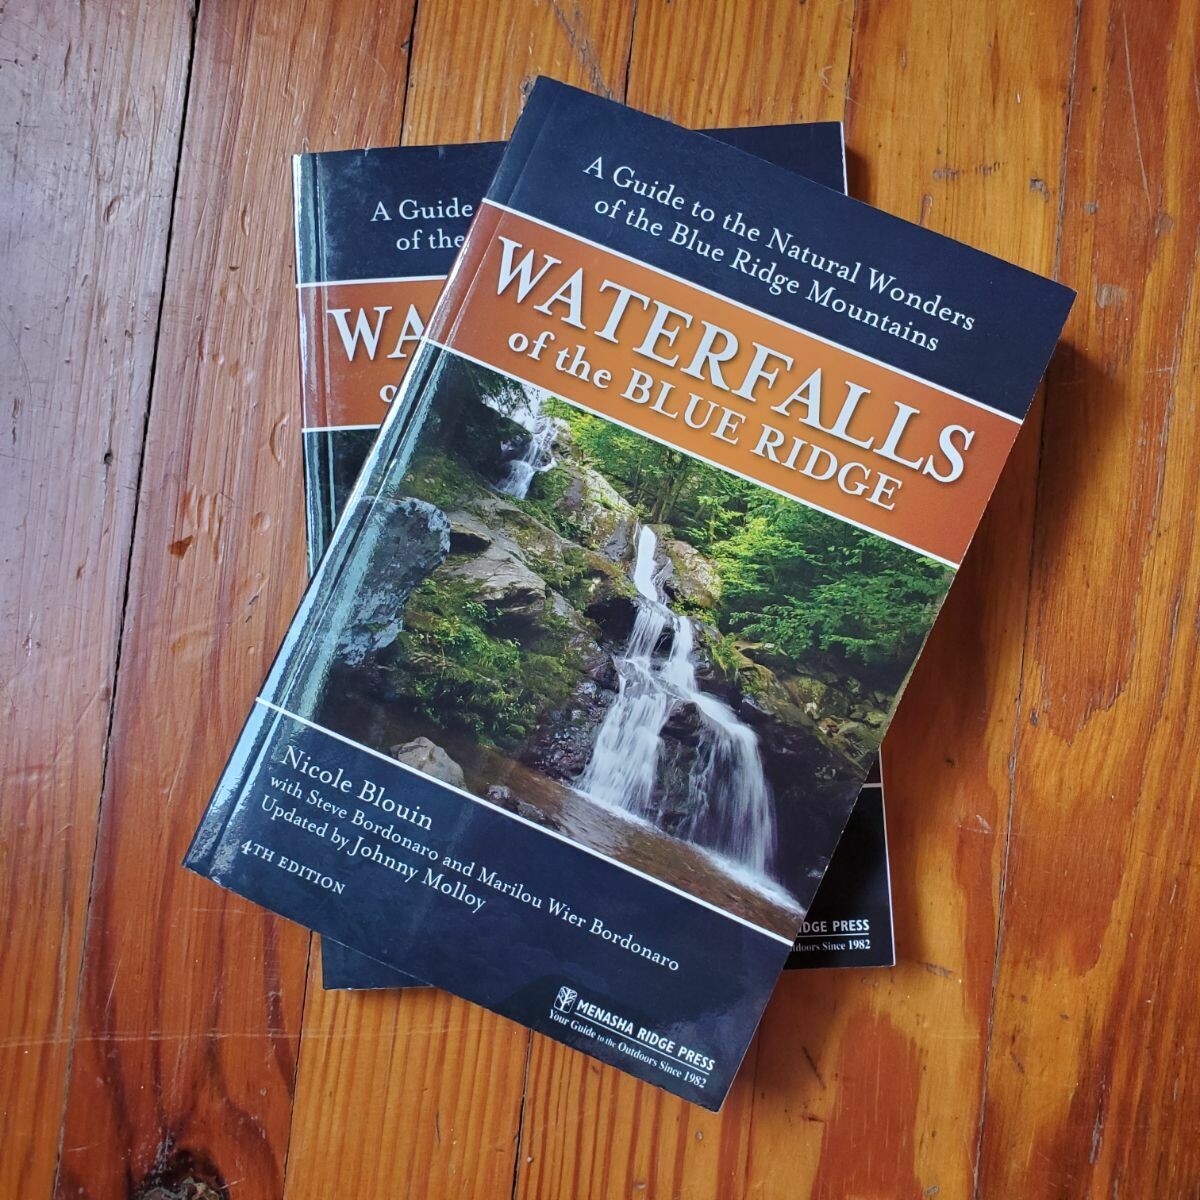 Waterfalls of the Blue Ridge by: Johnny Molloy